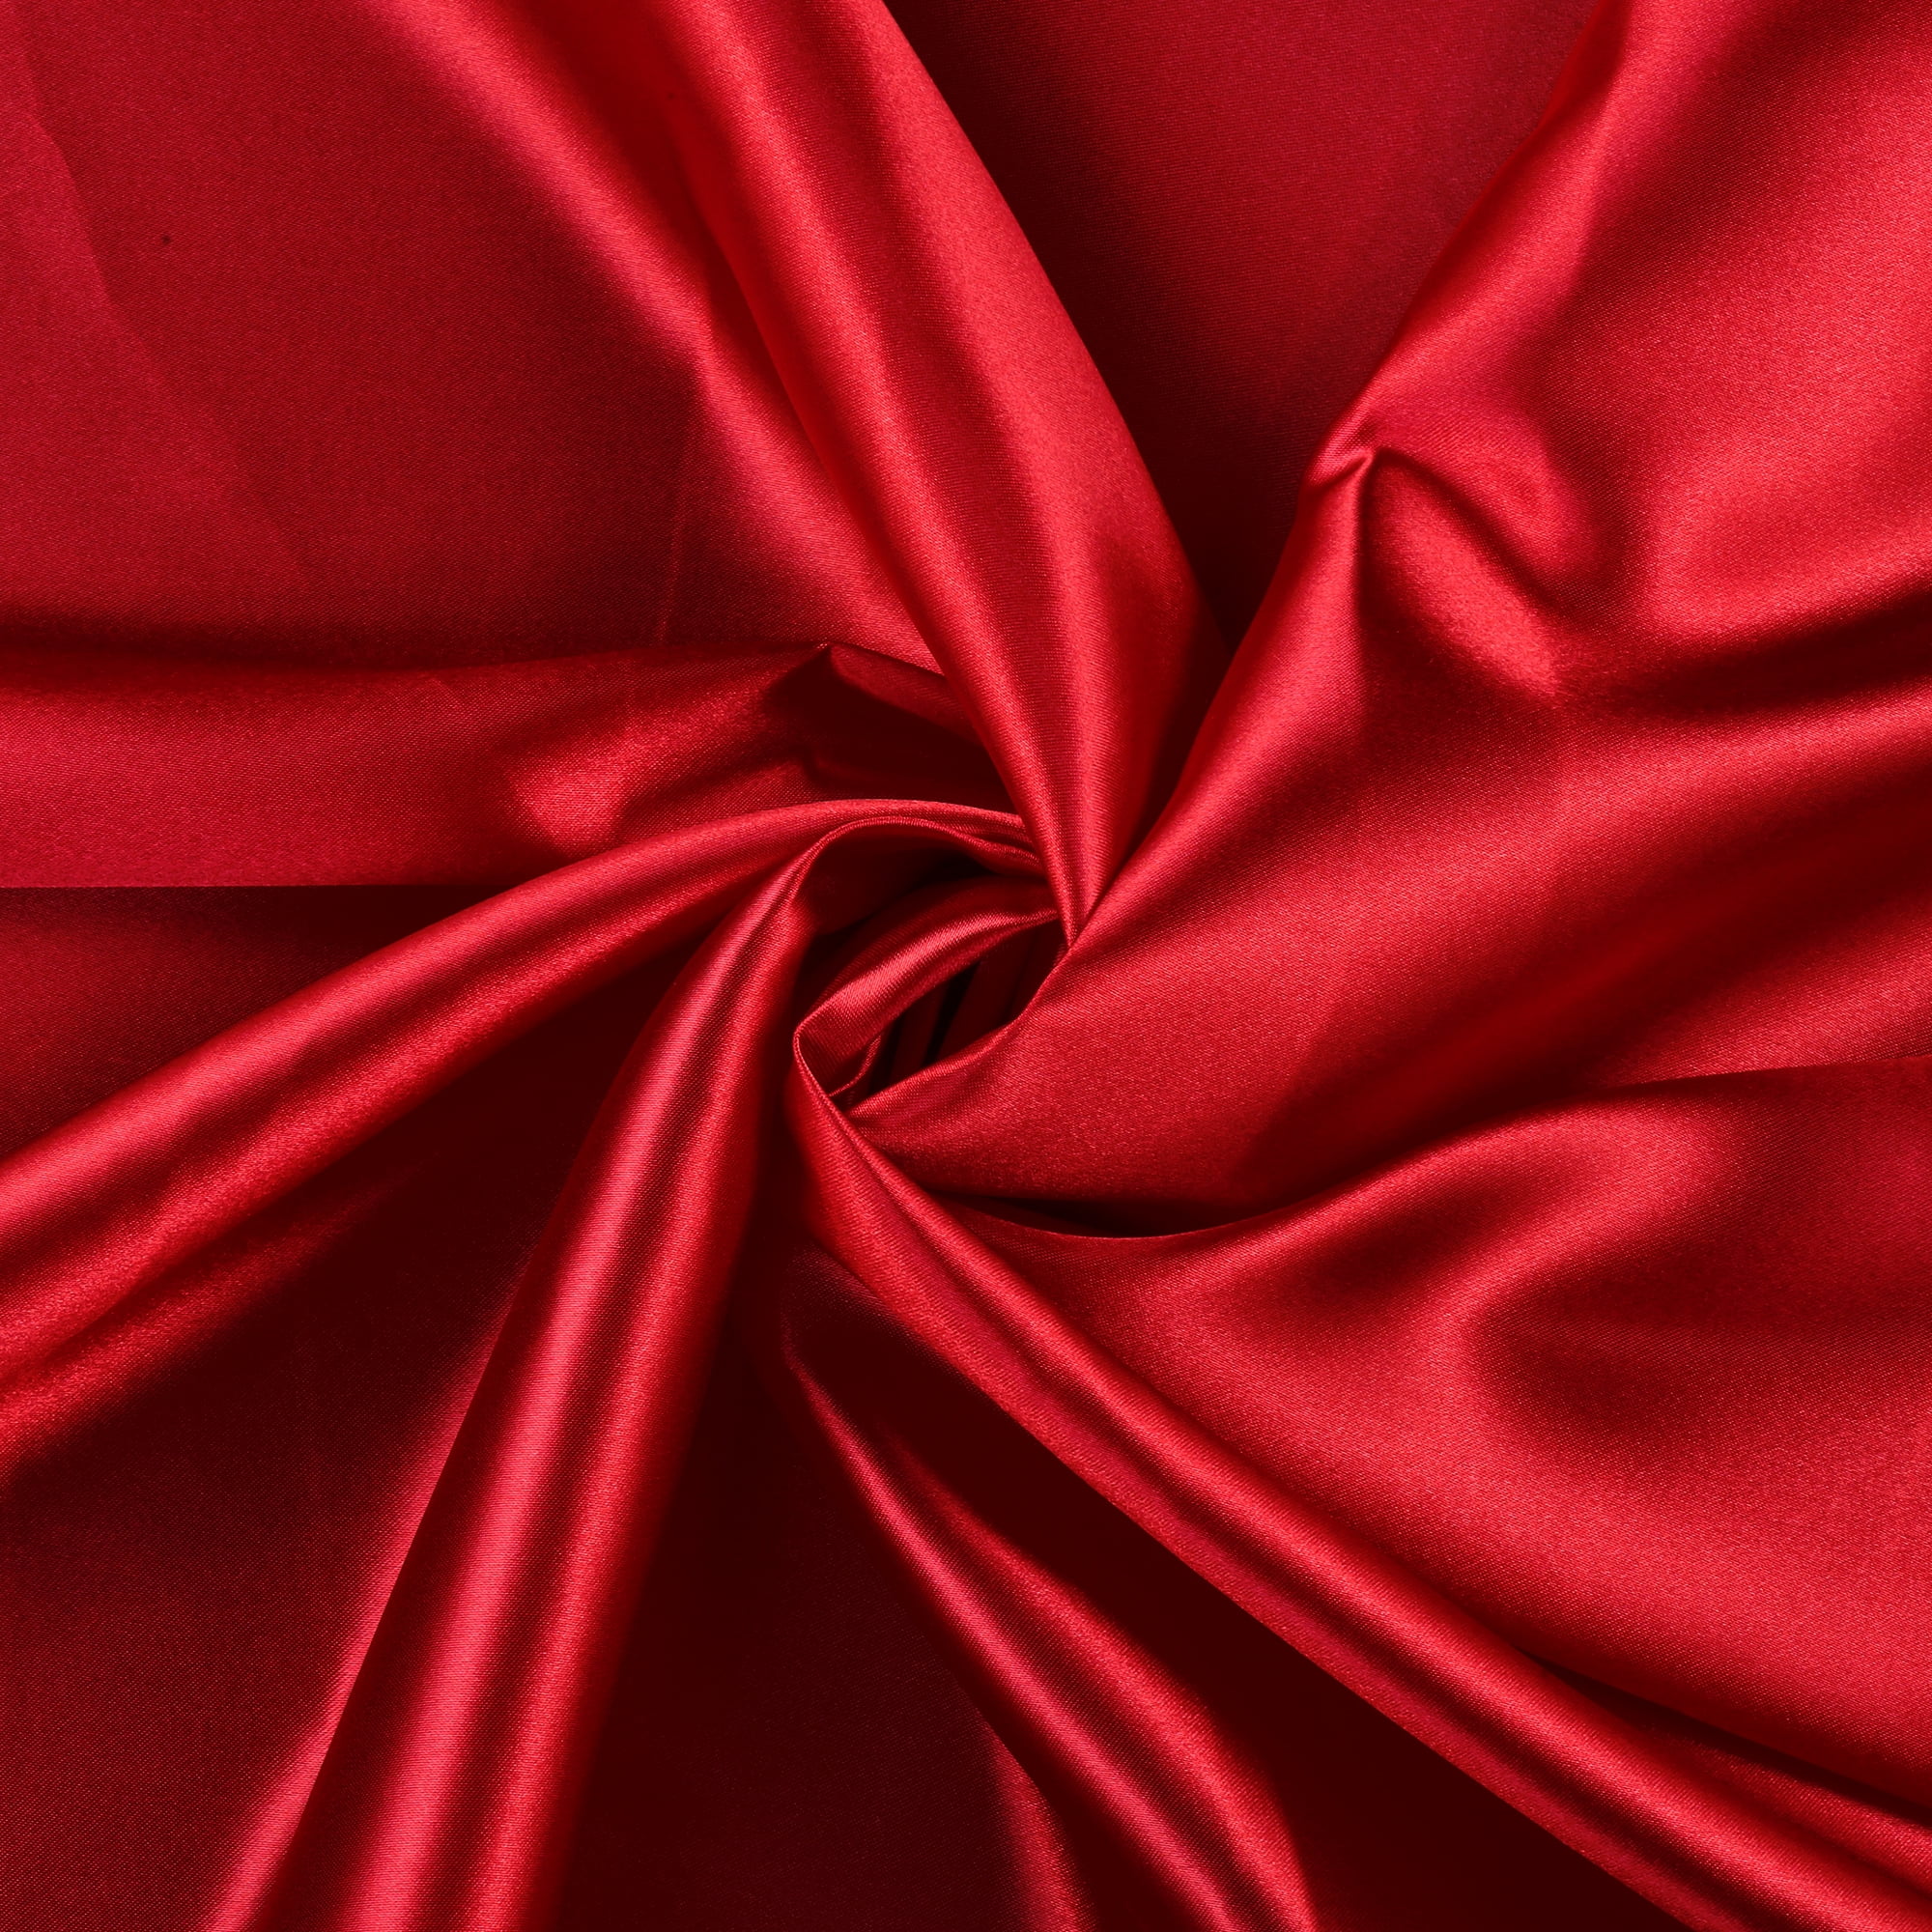 Apple Red mds Pack of 5 Yard Charmeuse Bridal Solid Satin Fabric for Wedding Dress Fashion Crafts Costumes Decorations Silky Satin 44”